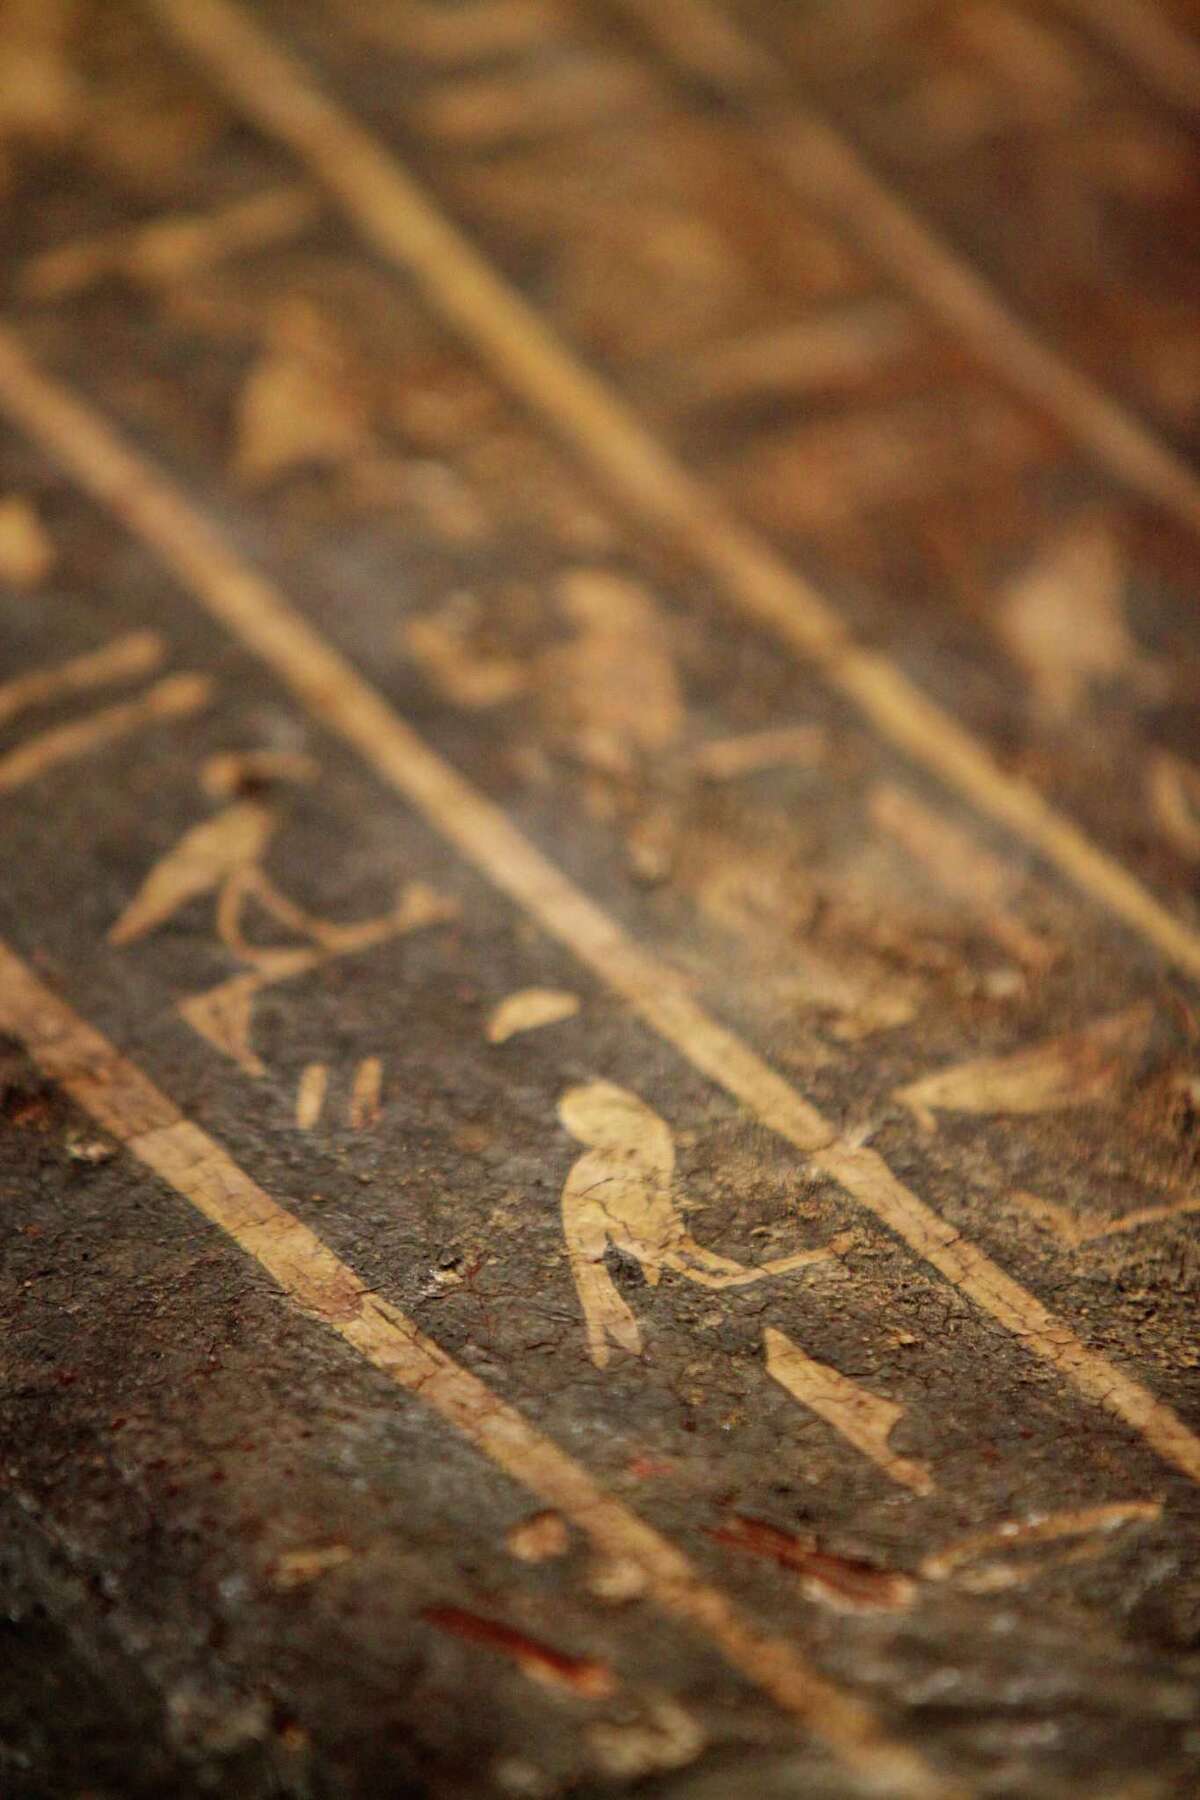 Hieroglyphs are found on the sarcophagus of Gemshuankh, a priest of the god Hersihef, which will be part of the new permanent Hall of Ancient Egypt at the Houston Museum of Natural Science on Wednesday, May 15, 2013, in Houston. ( Mayra Beltran / Houston Chronicle )